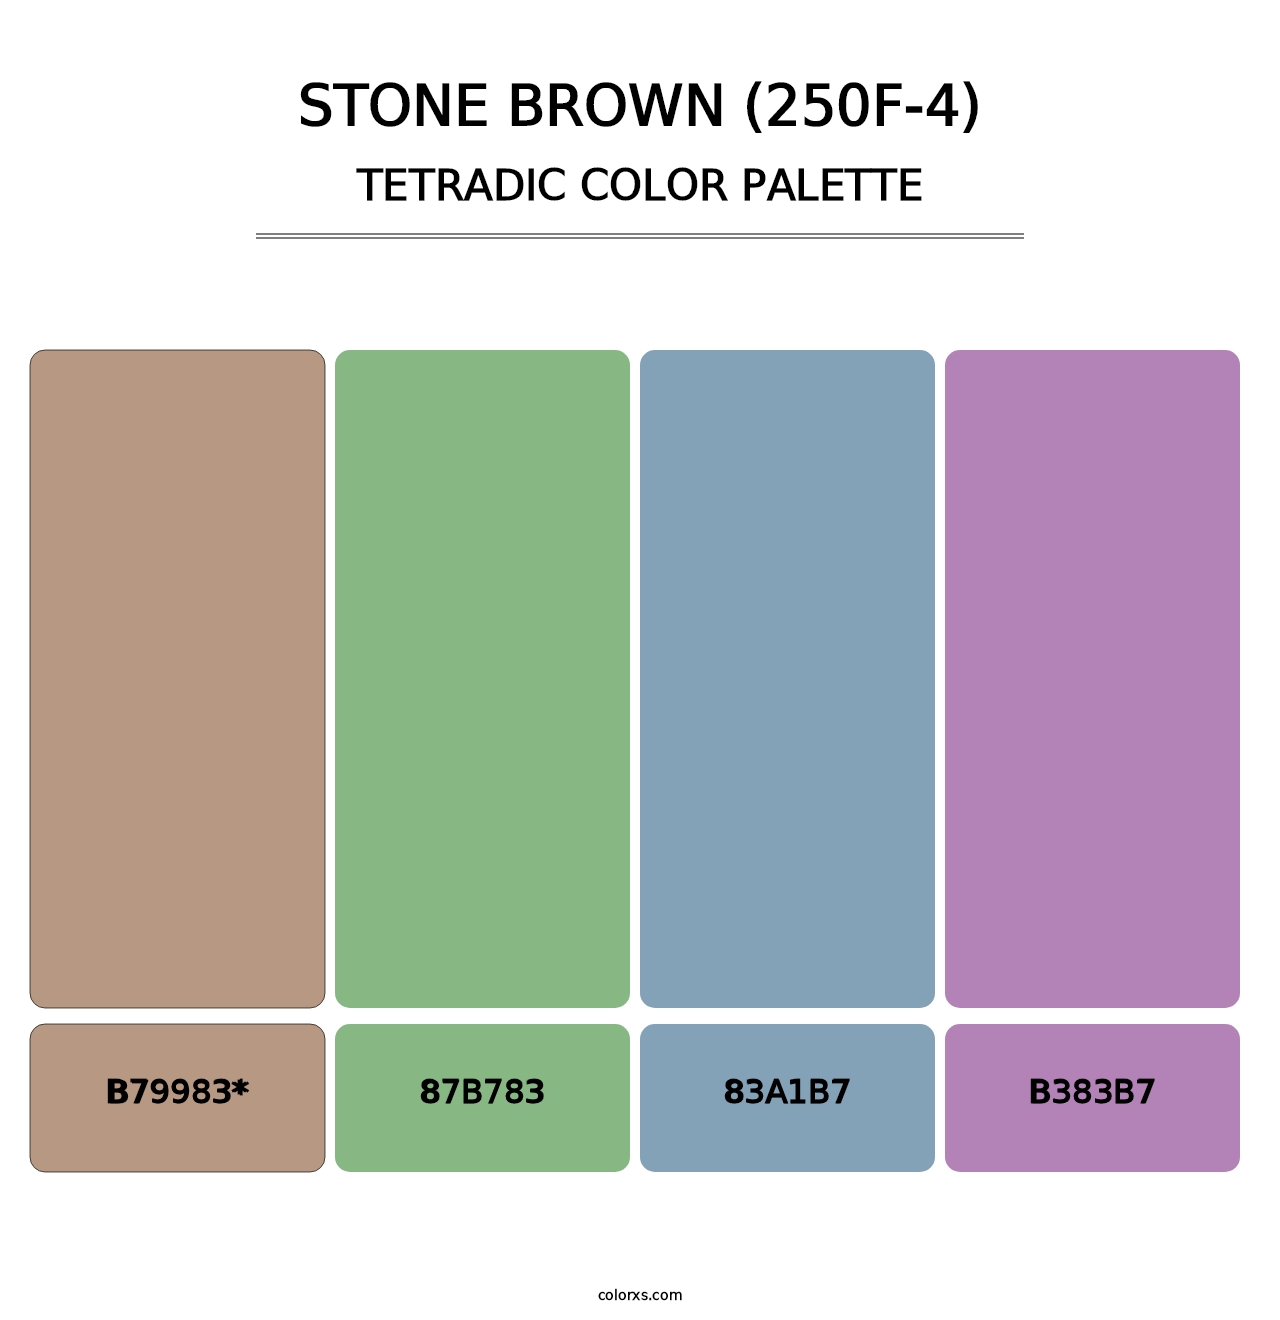 Stone Brown (250F-4) - Tetradic Color Palette